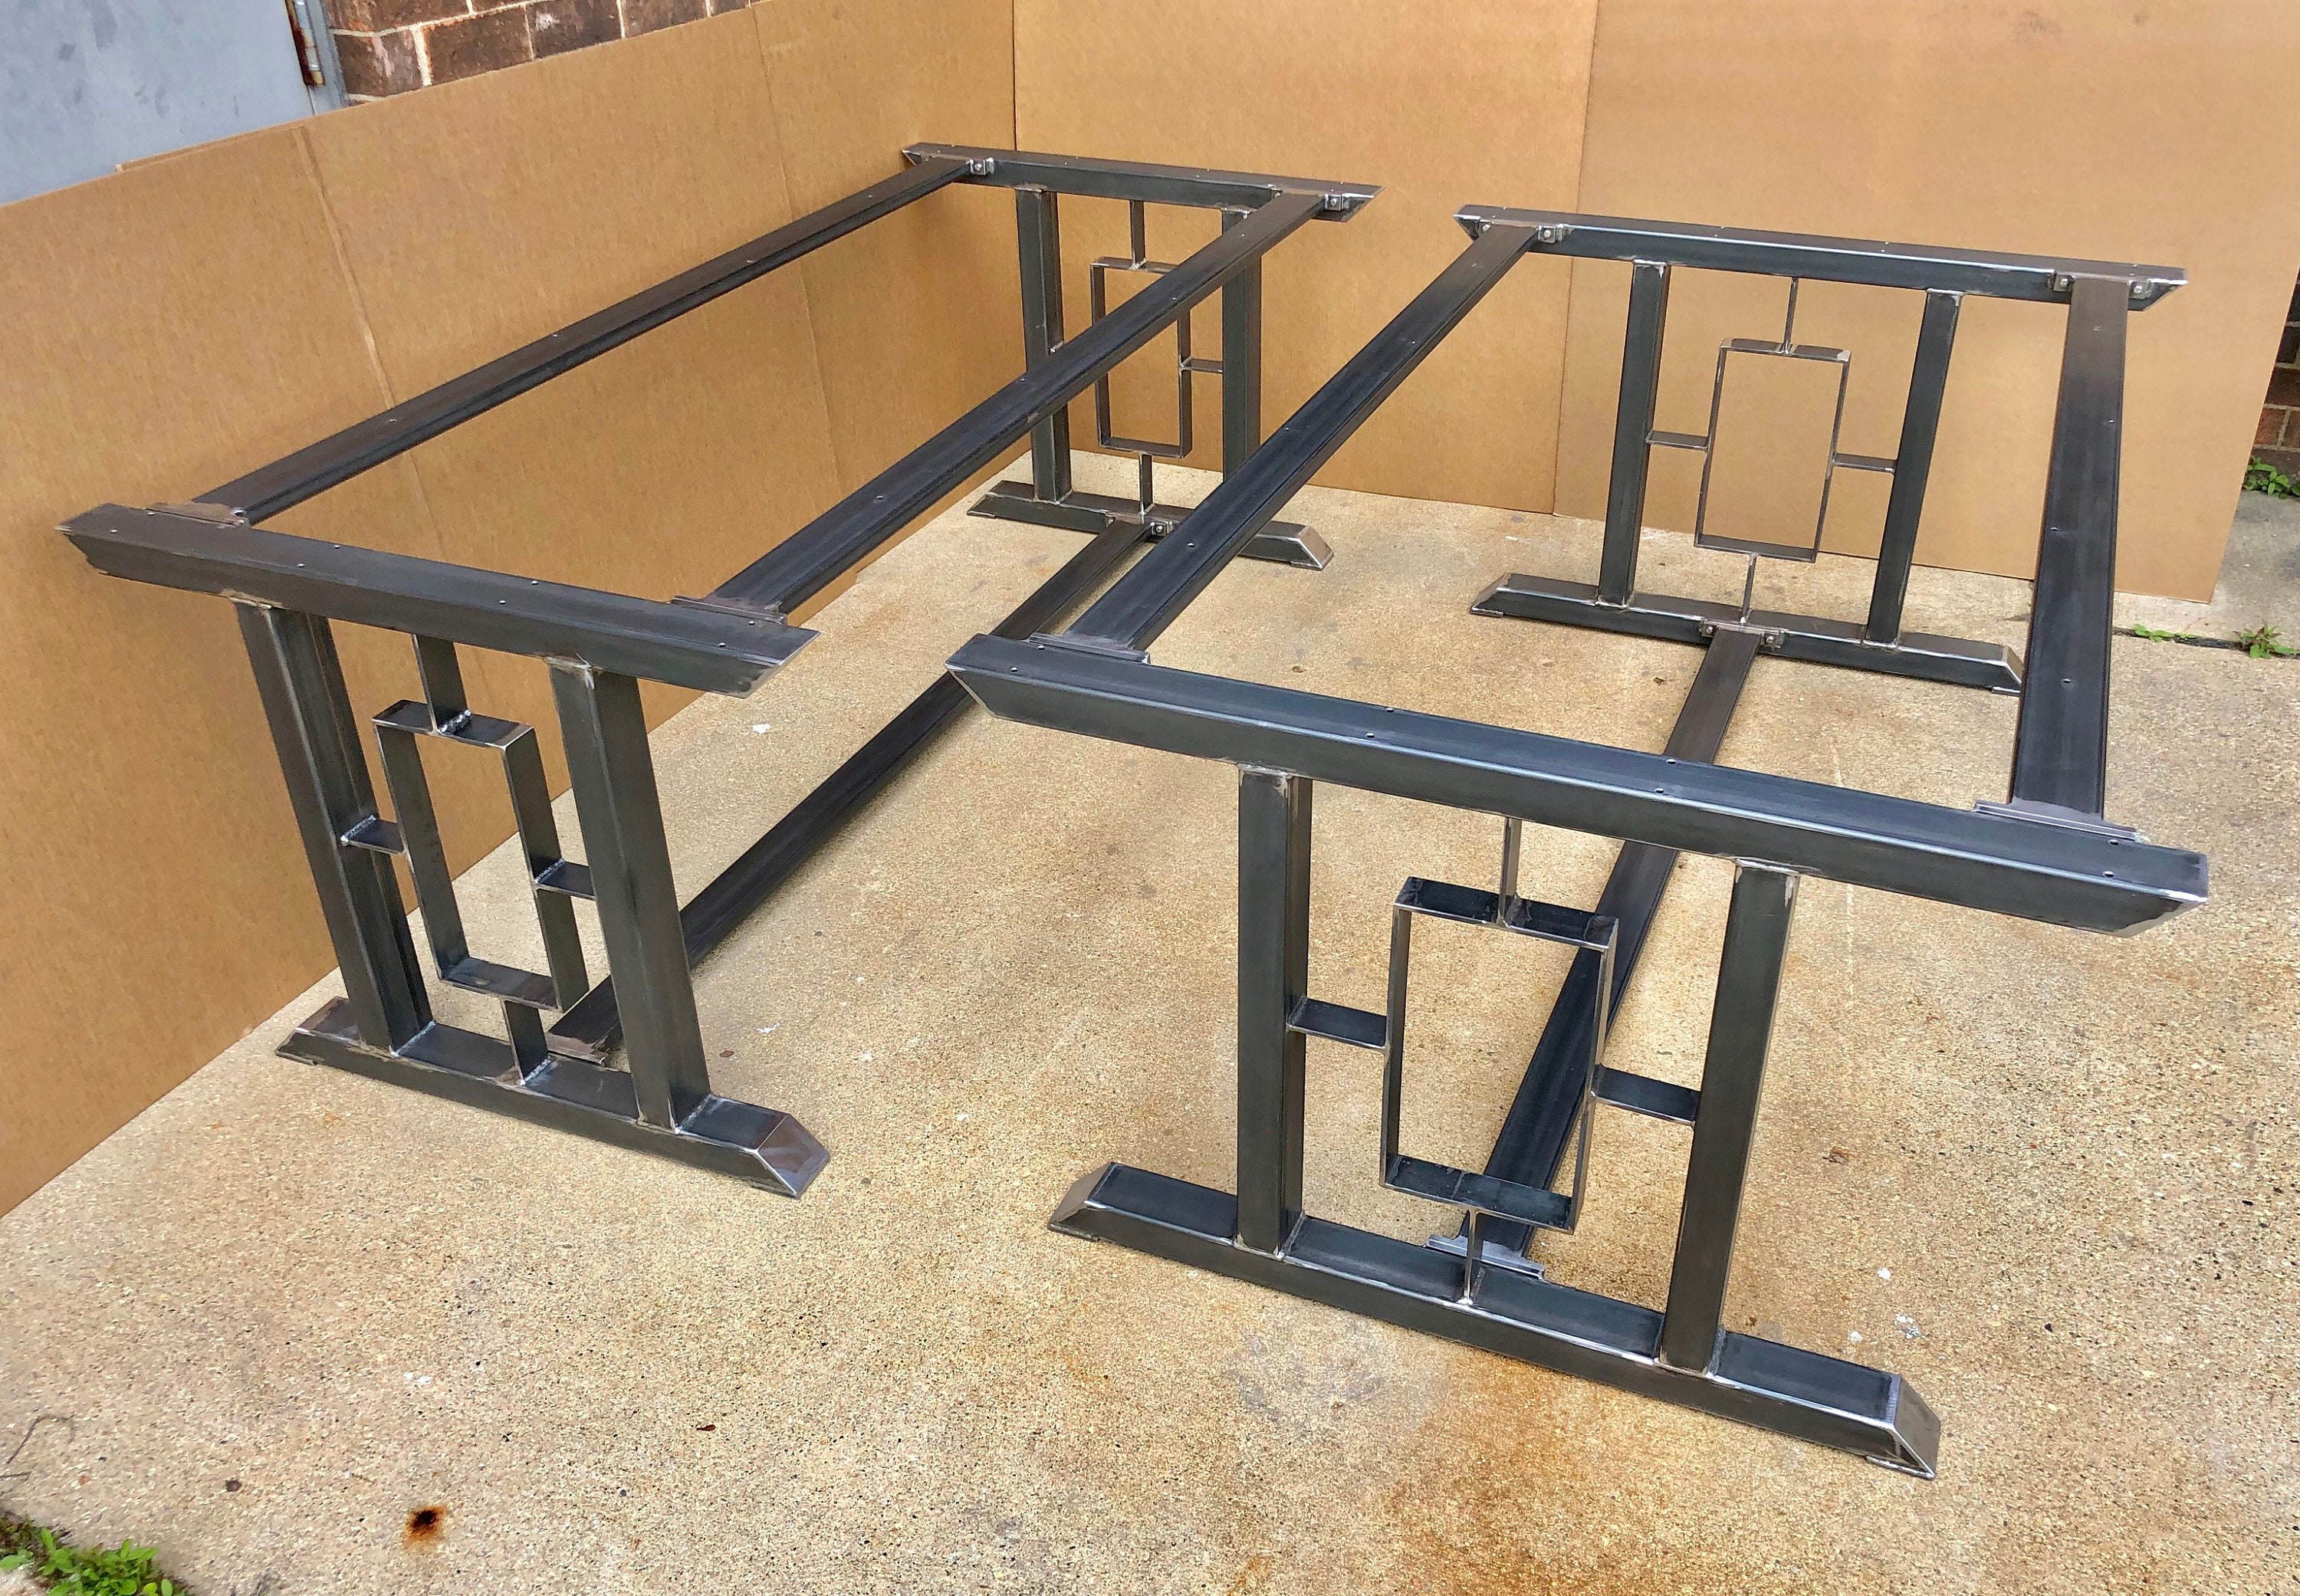 Modern Heavy Duty Table Base – Chicago Fabrications